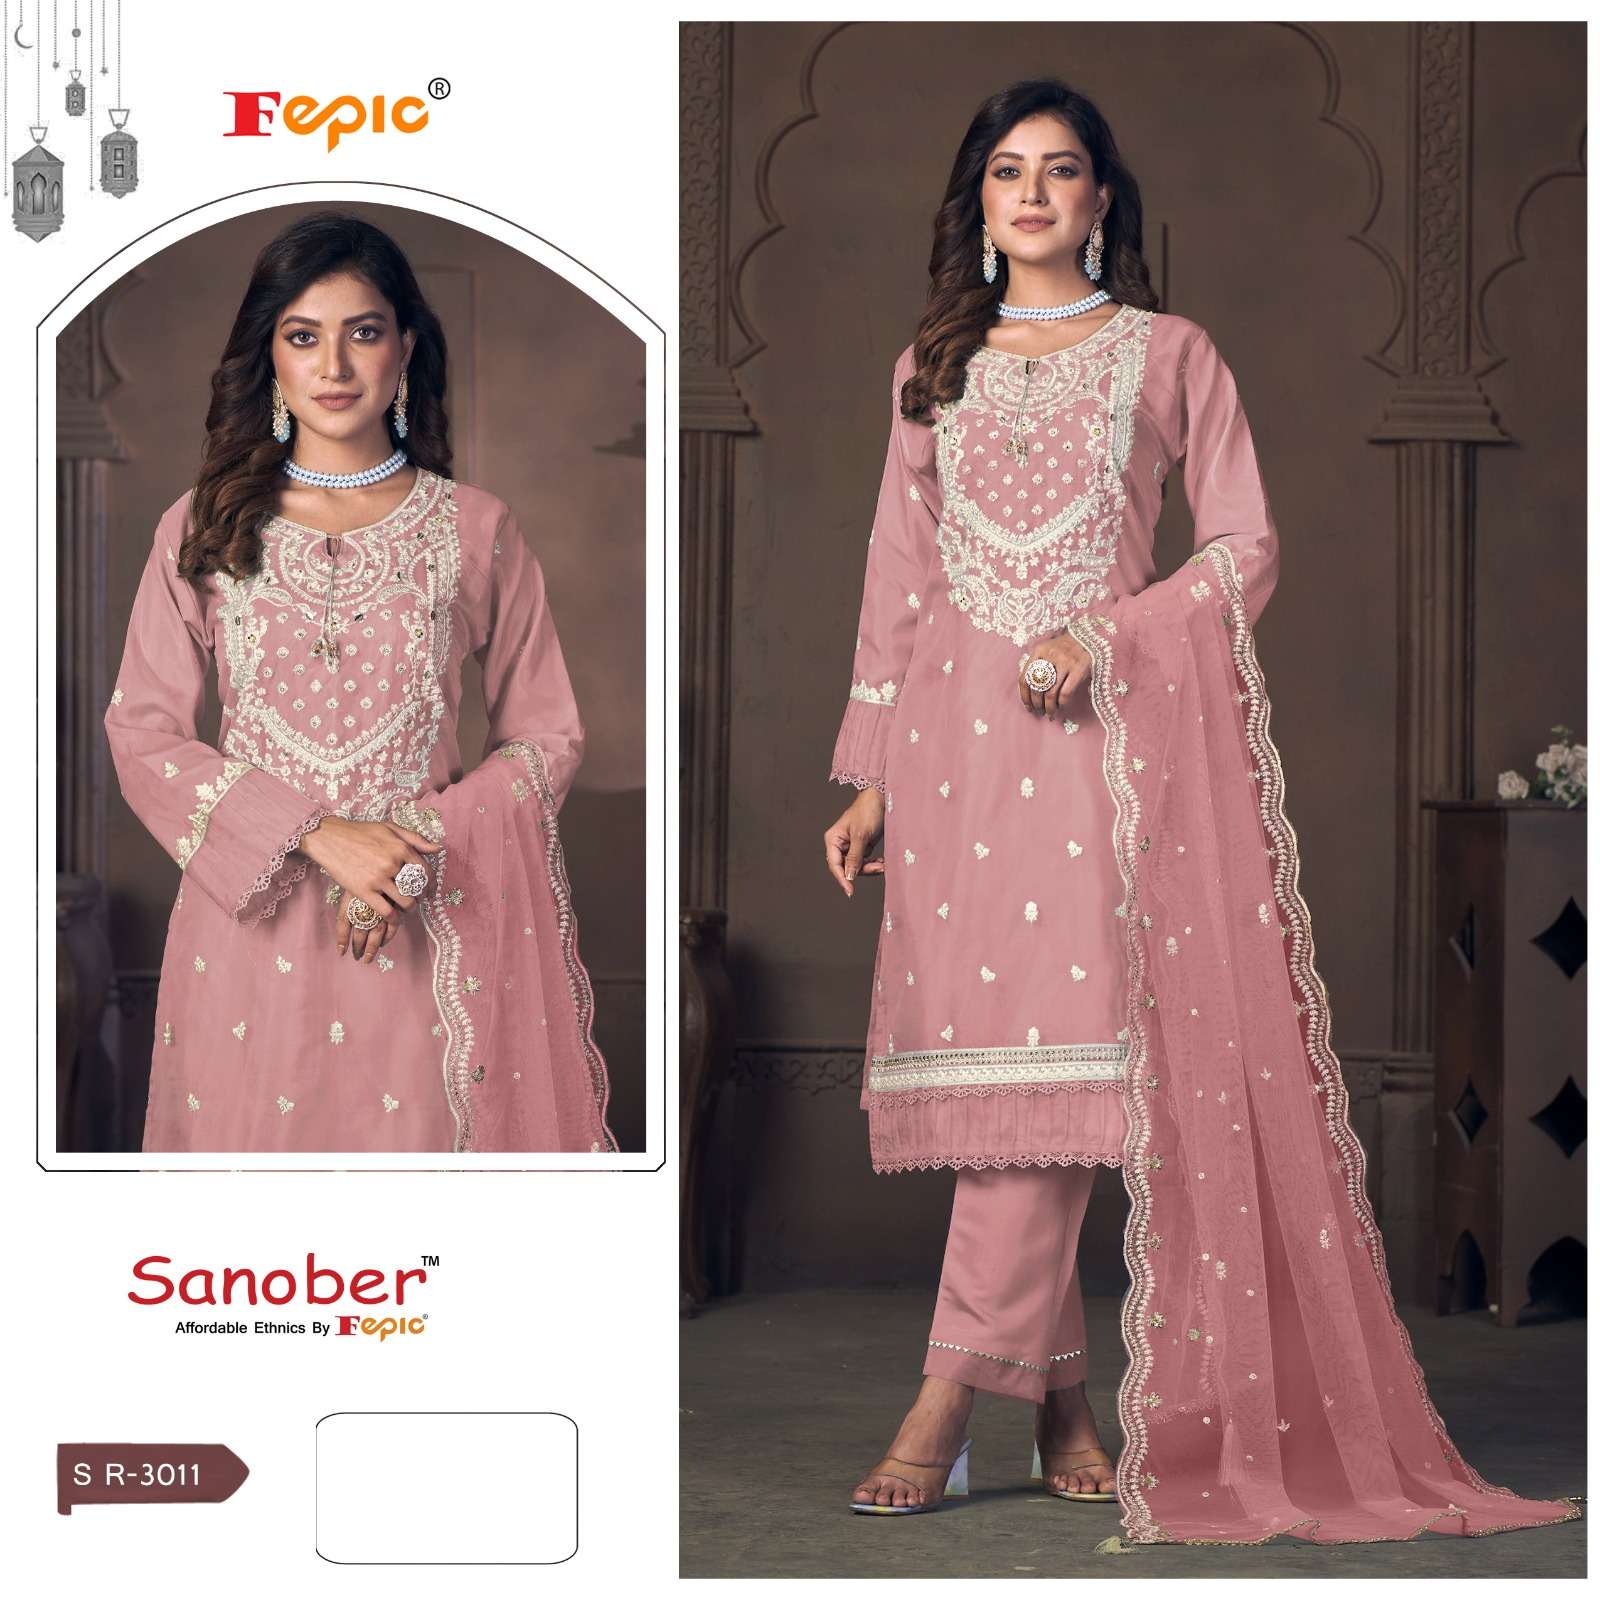 Fepic Sanober Sr 3011 New Colors Organza Pakistani Suits Readymade Collection